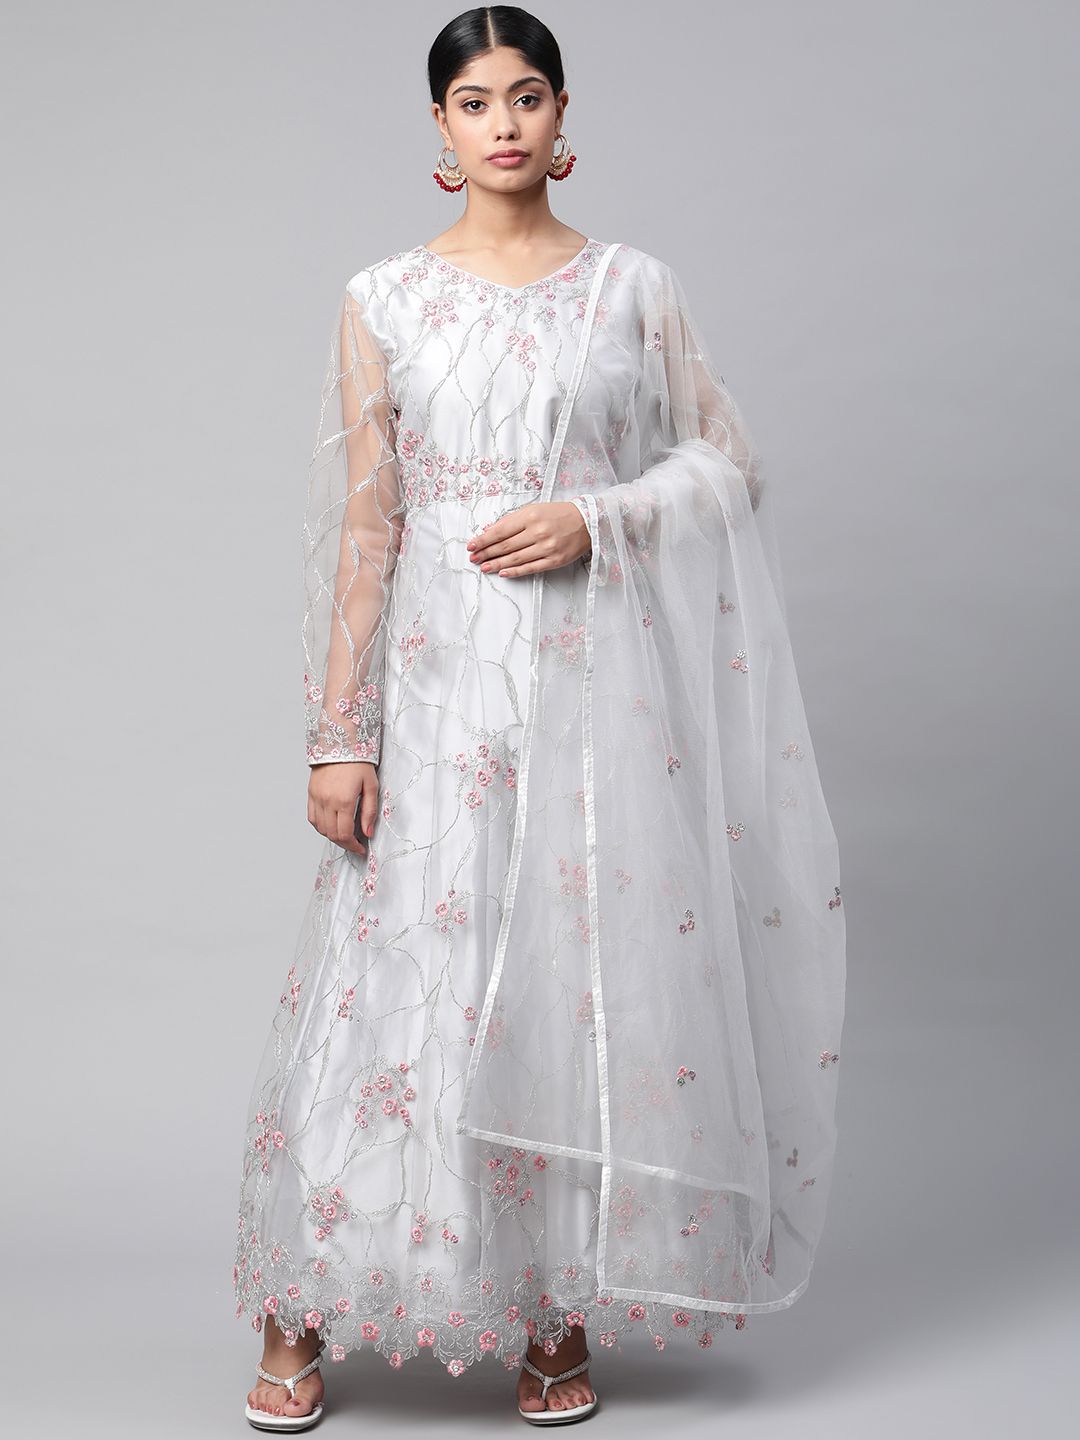 Readiprint Fashions Grey & Peach-Coloured Embroidered Semi-Stitched Dress Material Price in India